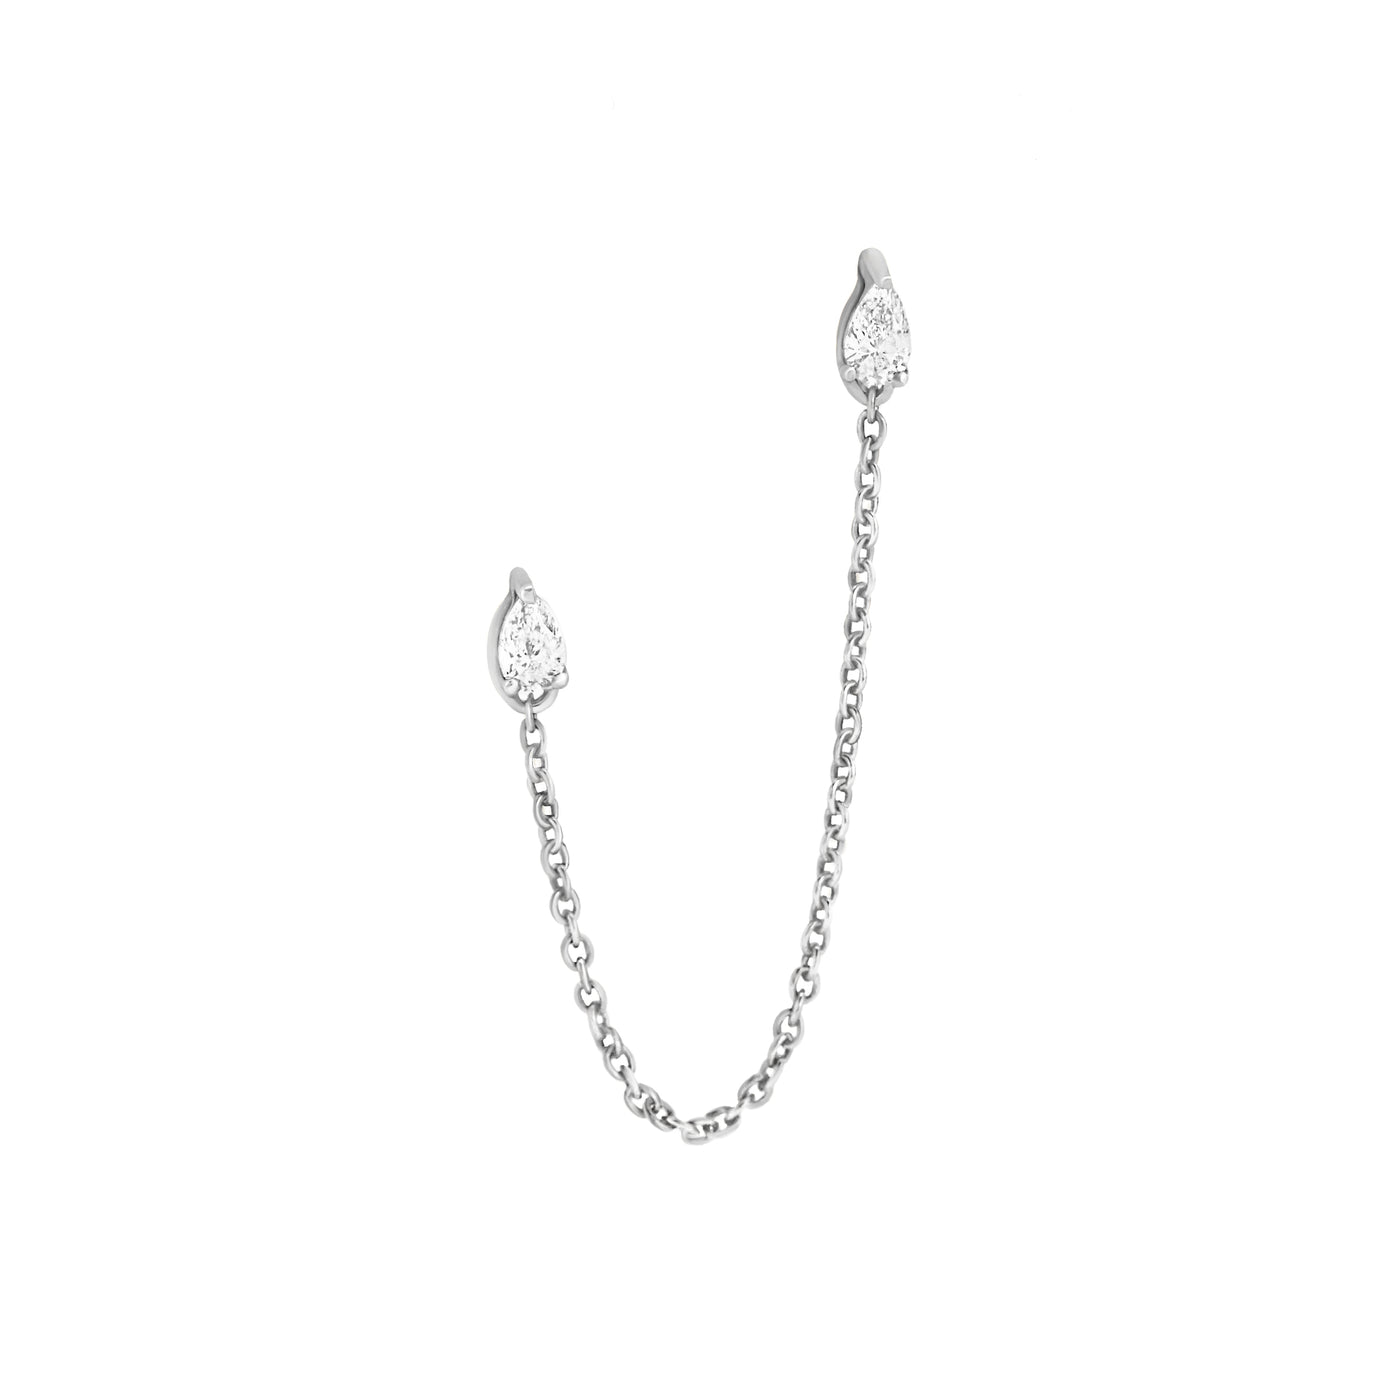 14k Karat white gold earrings with chain and pear shape diamonds on white background